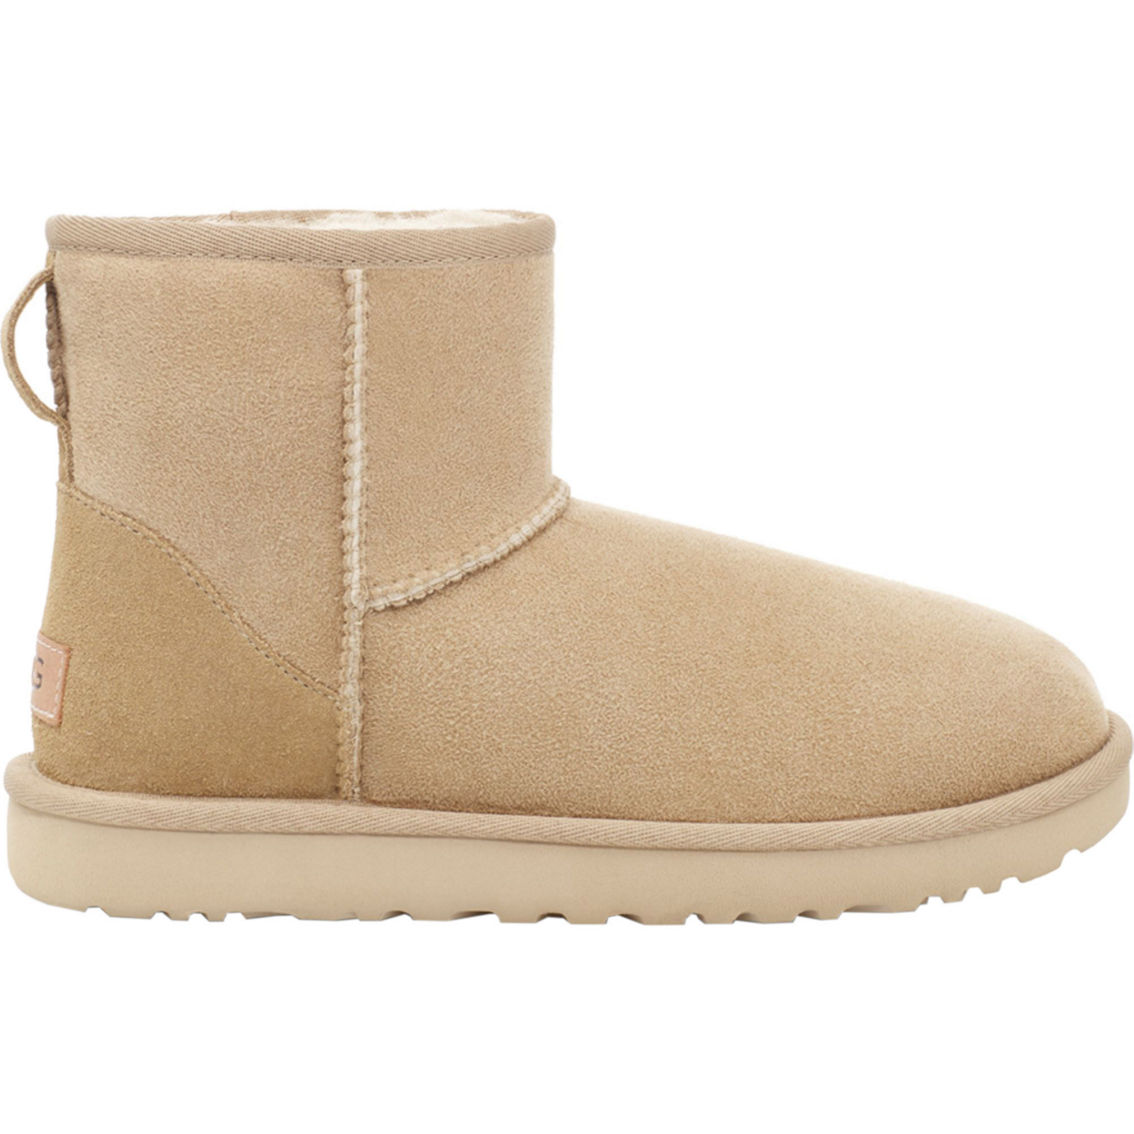 Ugg Classic Mini Boots | Booties | Shoes | Shop The Exchange